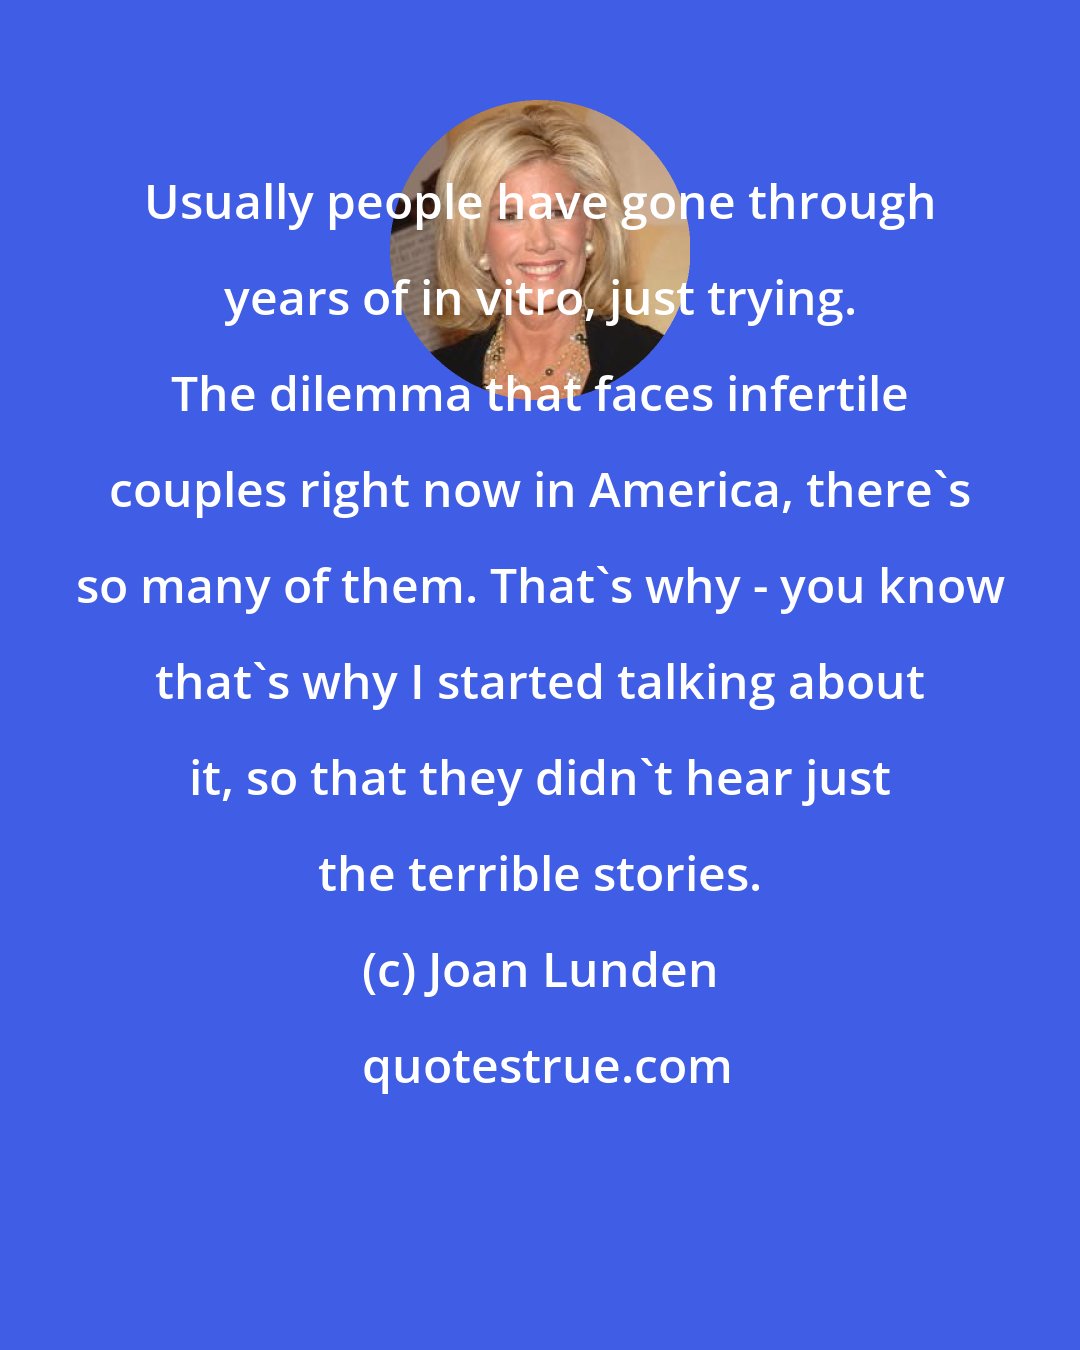 Joan Lunden: Usually people have gone through years of in vitro, just trying. The dilemma that faces infertile couples right now in America, there's so many of them. That's why - you know that's why I started talking about it, so that they didn't hear just the terrible stories.